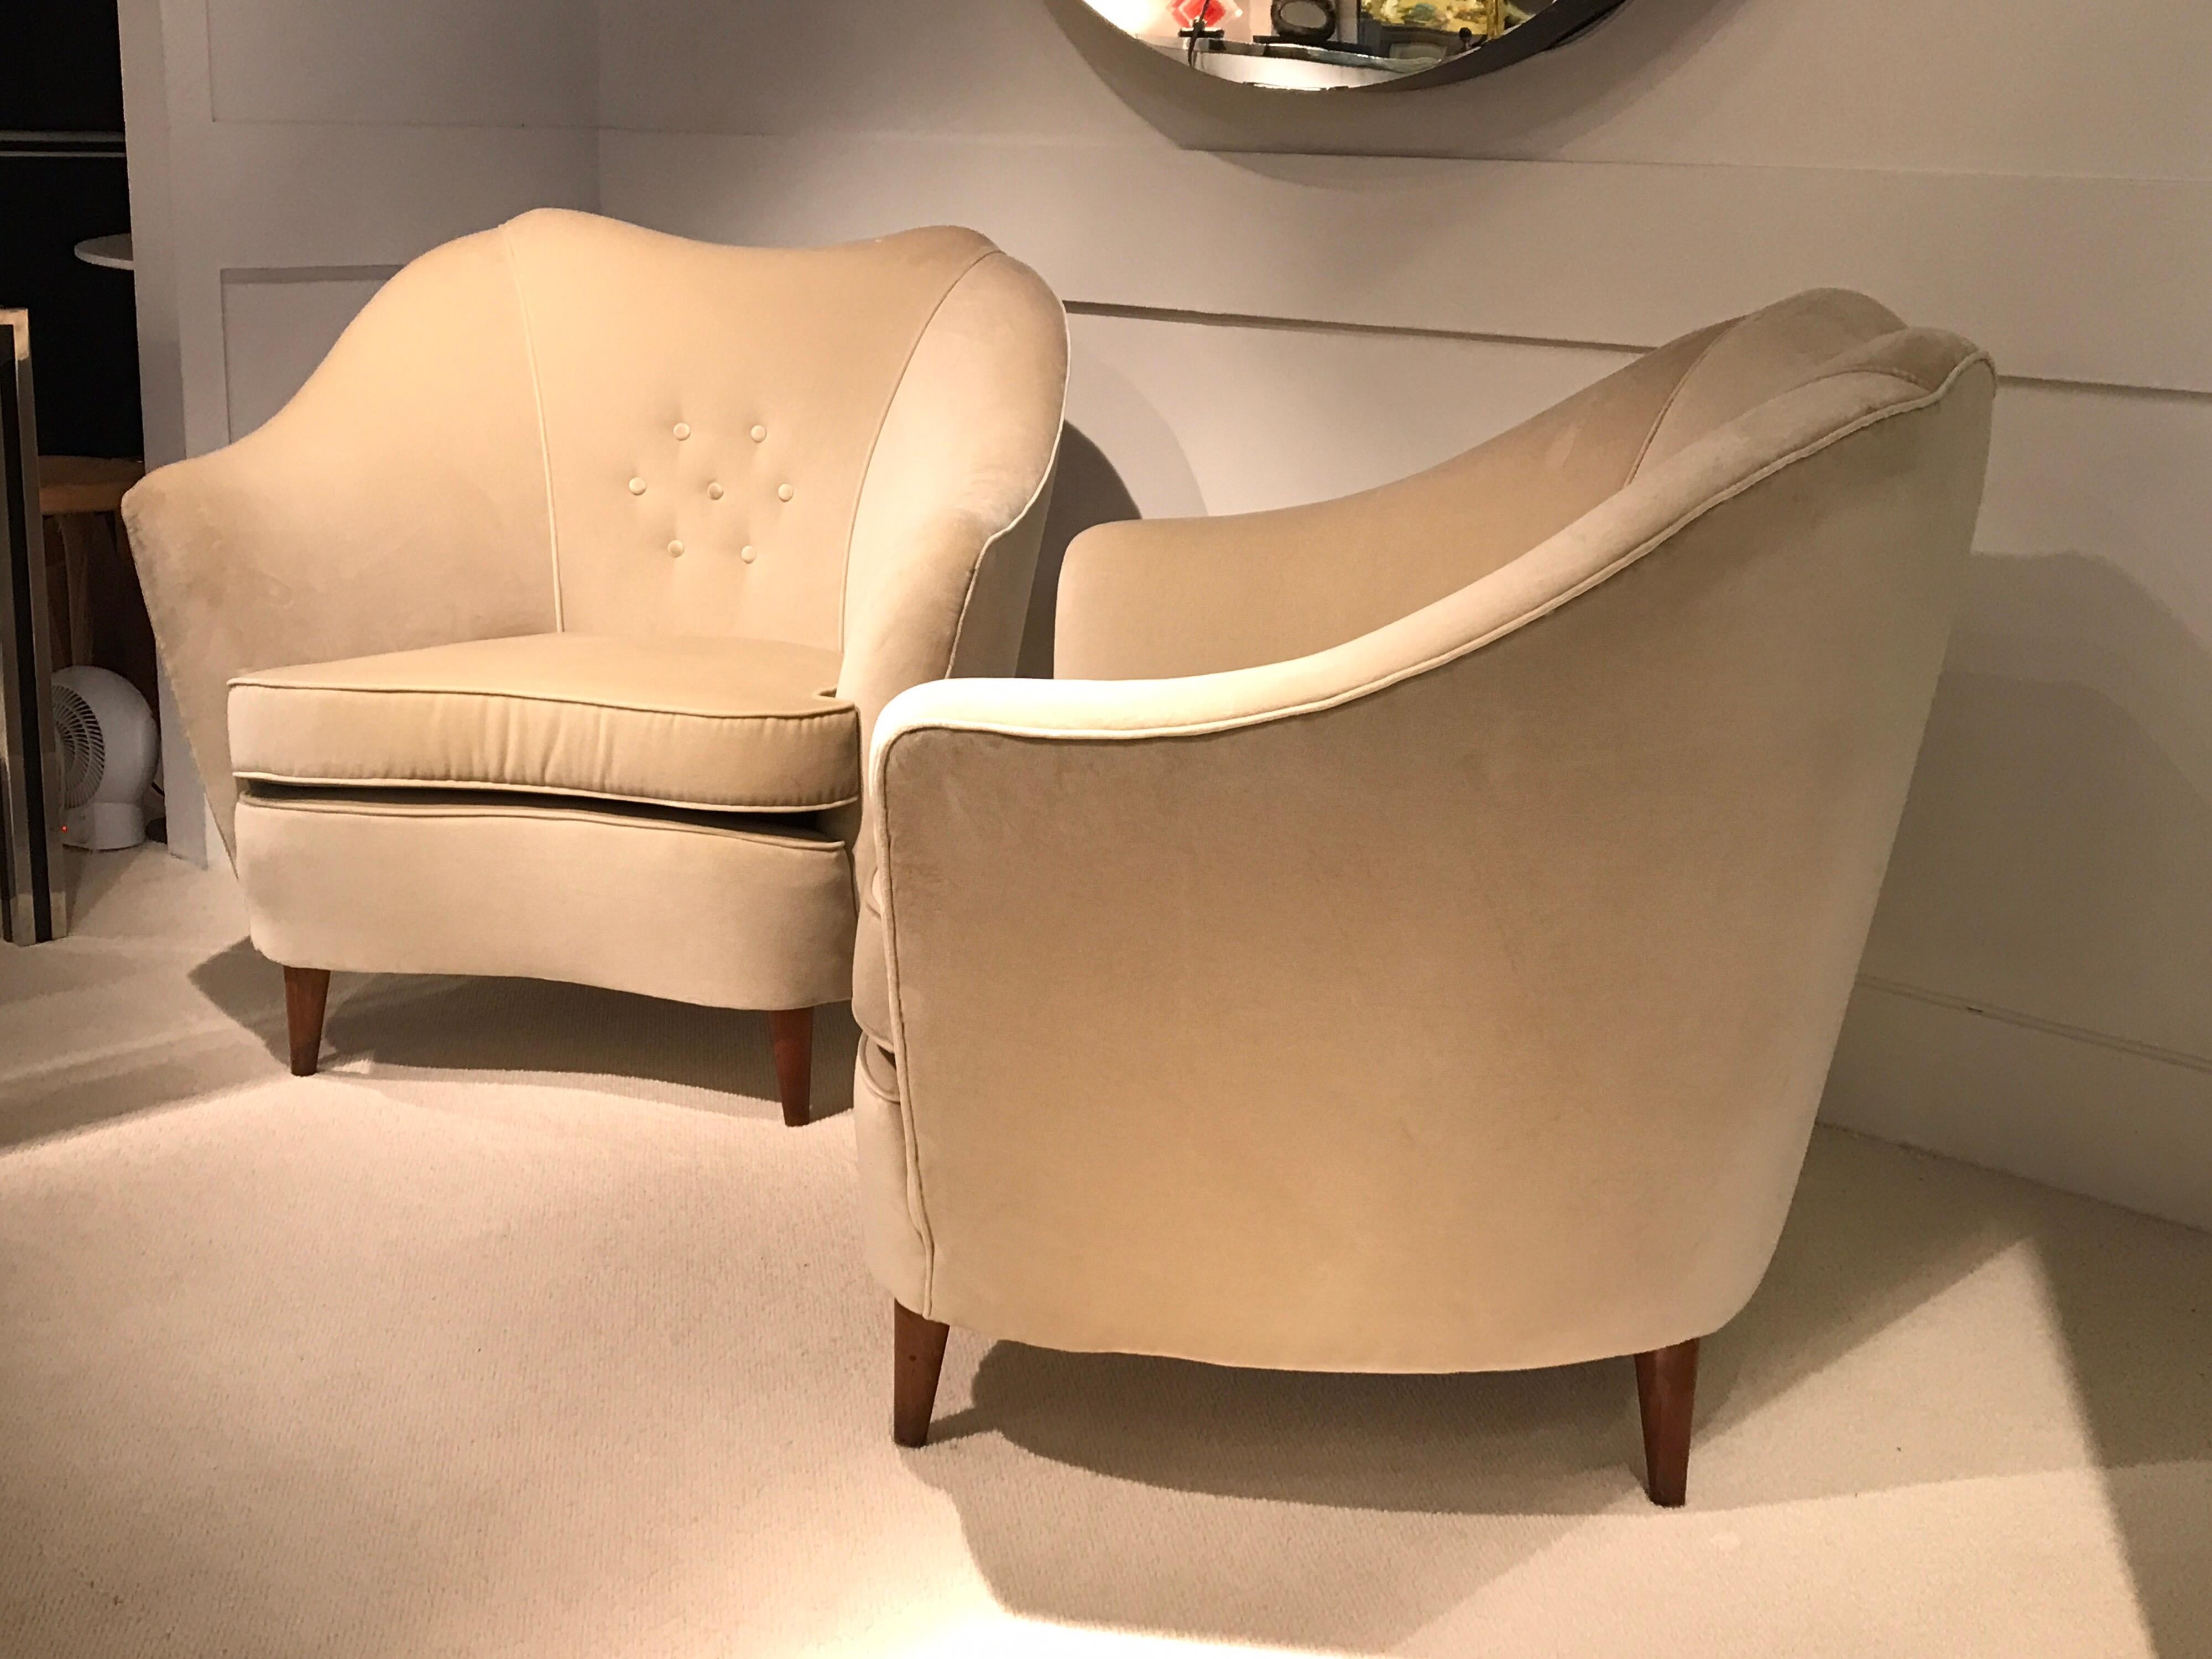 Pair of 1950 armchairs by Federico Munary;
Reupholstered with 100 % cotton Velvet.
Great condition.